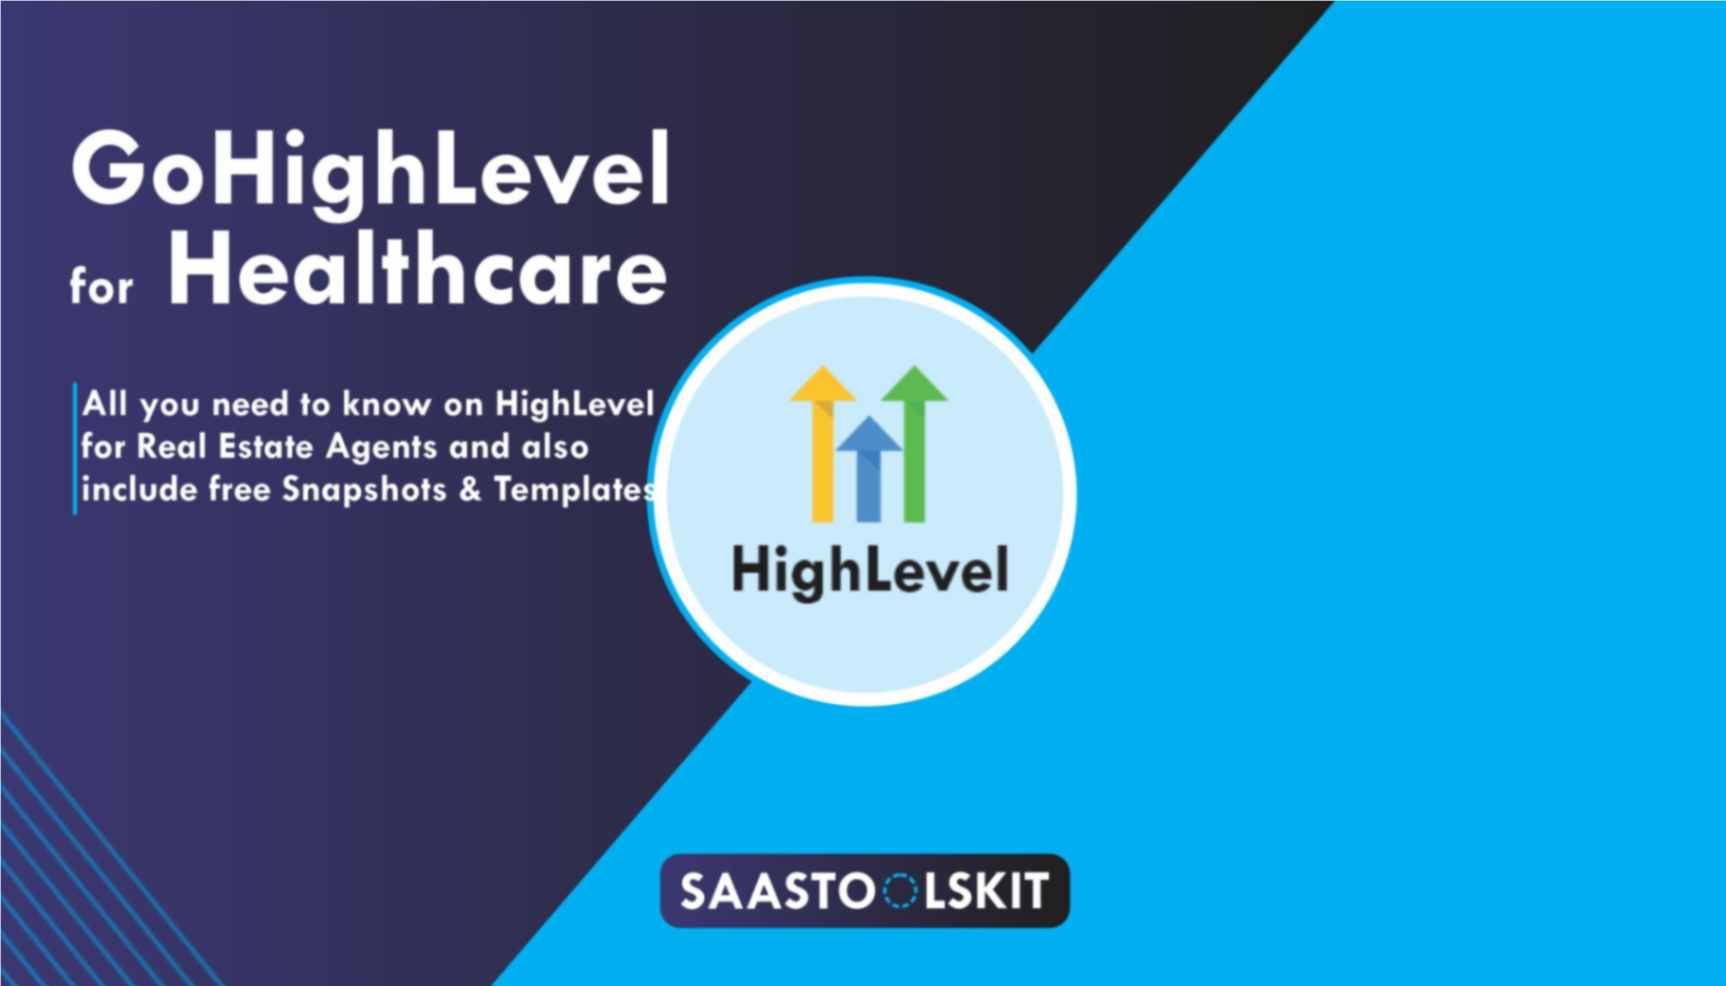 GoHighLevel for Healthcare Professionals [Full Guide]